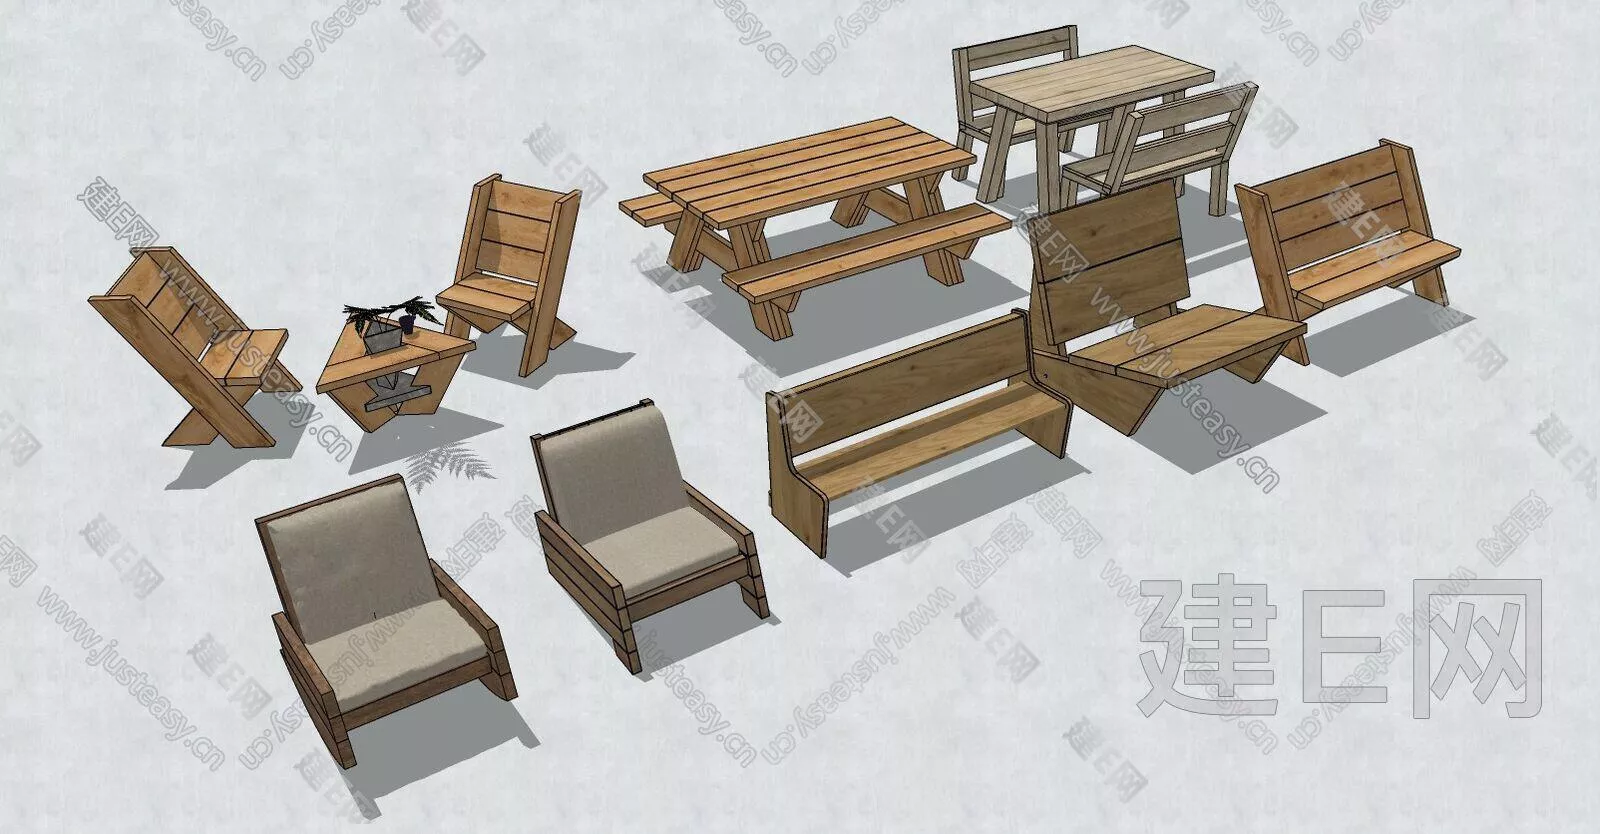 CHINESE OUTDOOR TABLE SET - SKETCHUP 3D MODEL - ENSCAPE - 109265054